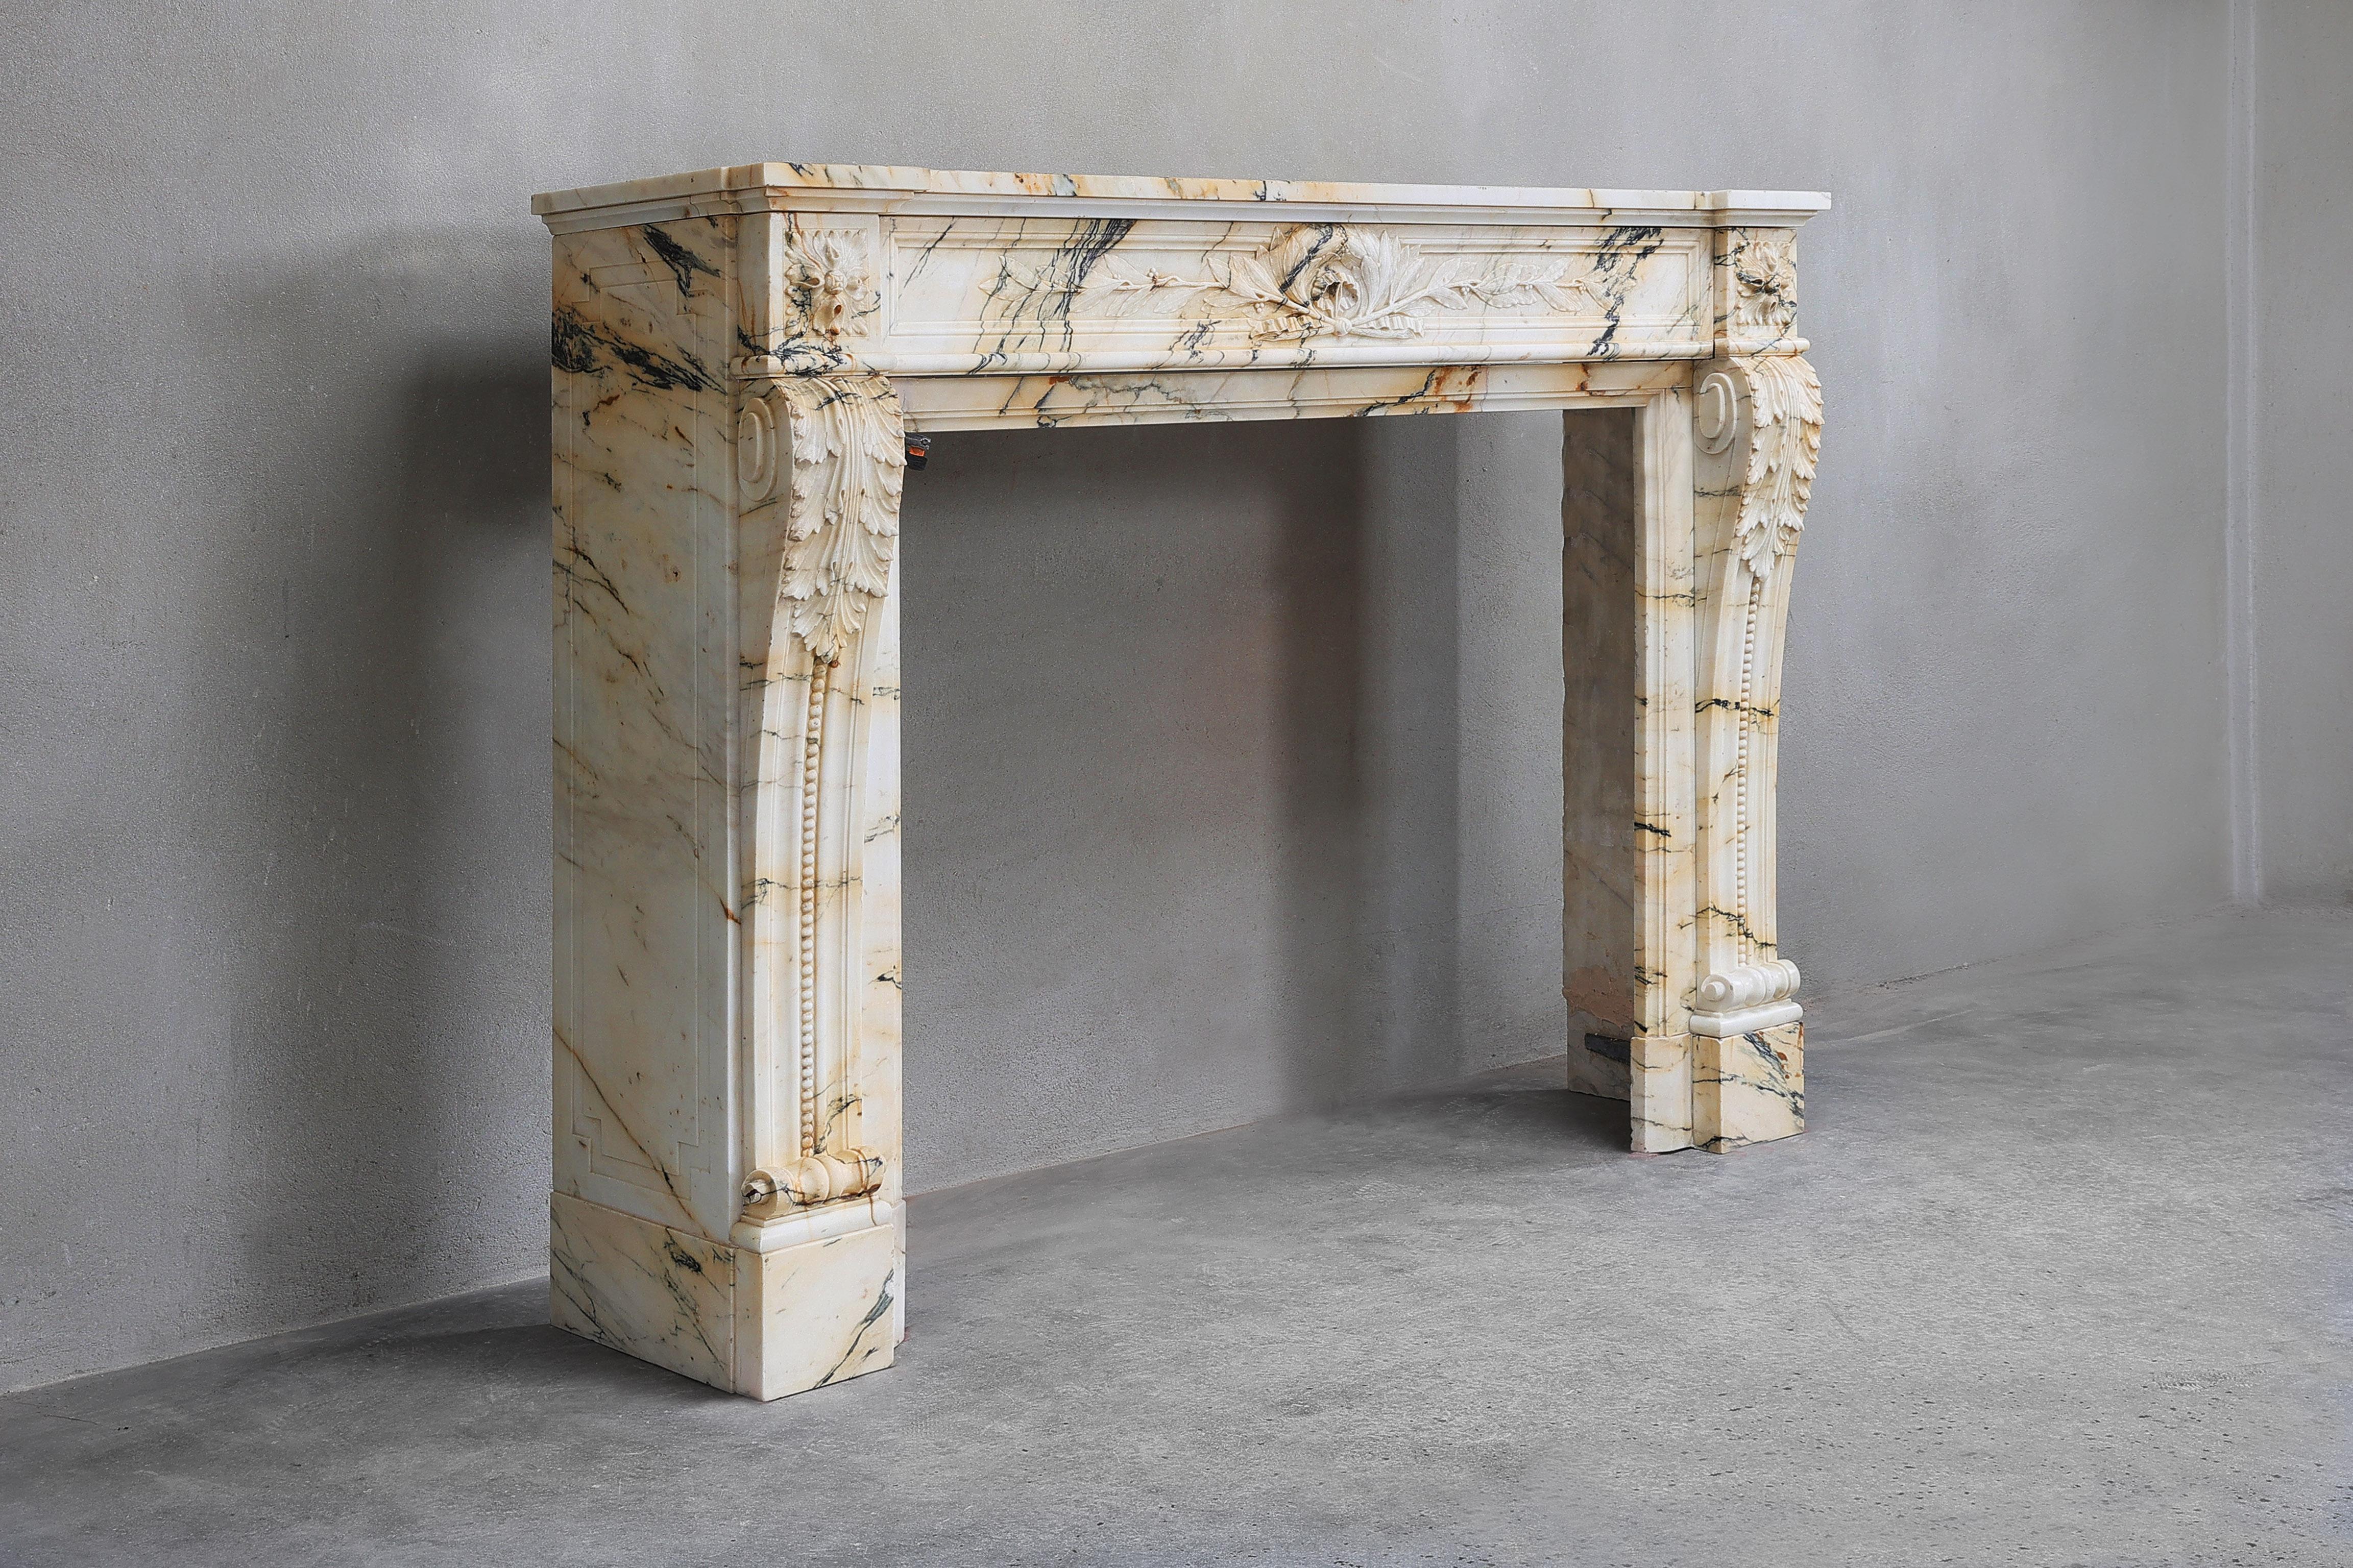 Very nice antique fireplace made of the exclusive Paonazzo marble. This fireplace dates from the 19th century and is in the style of Louis XVI. Fitted with feuille d'aconte on the legs and feuille de laurier. Paonazzo marble is, next to Sienna